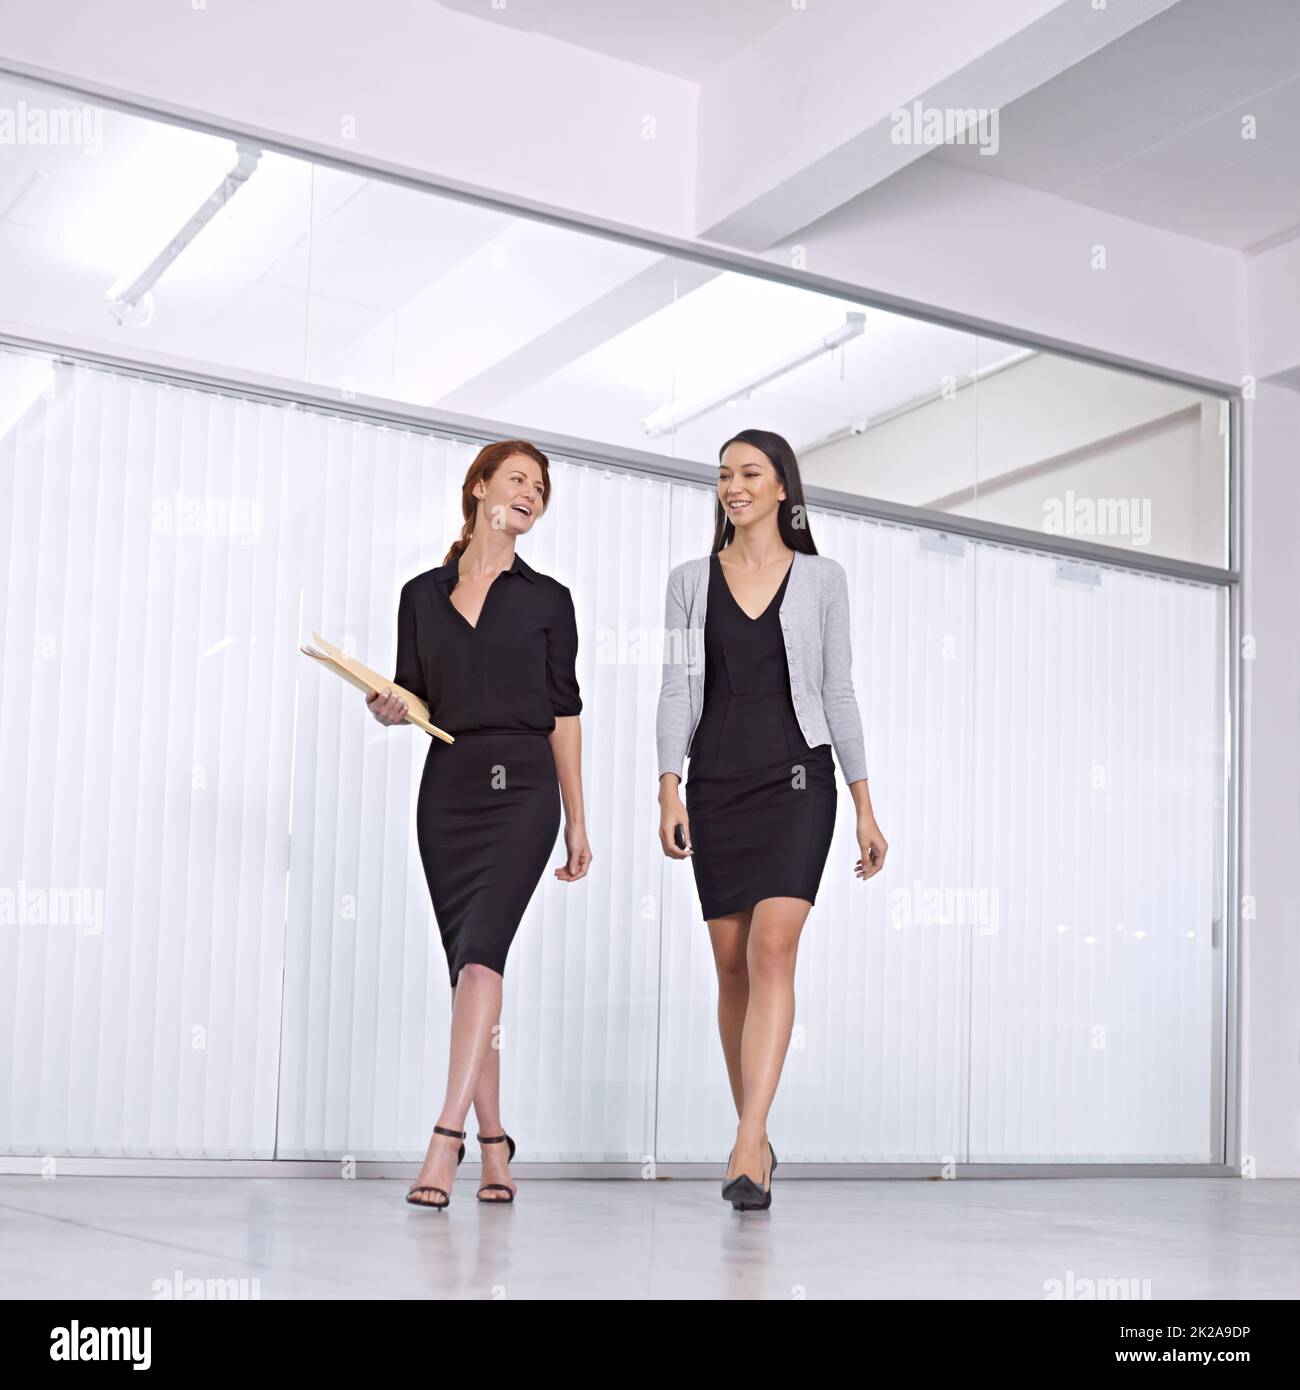 Off to the next meeting. Two colleagues walking together in the office talking. Stock Photo